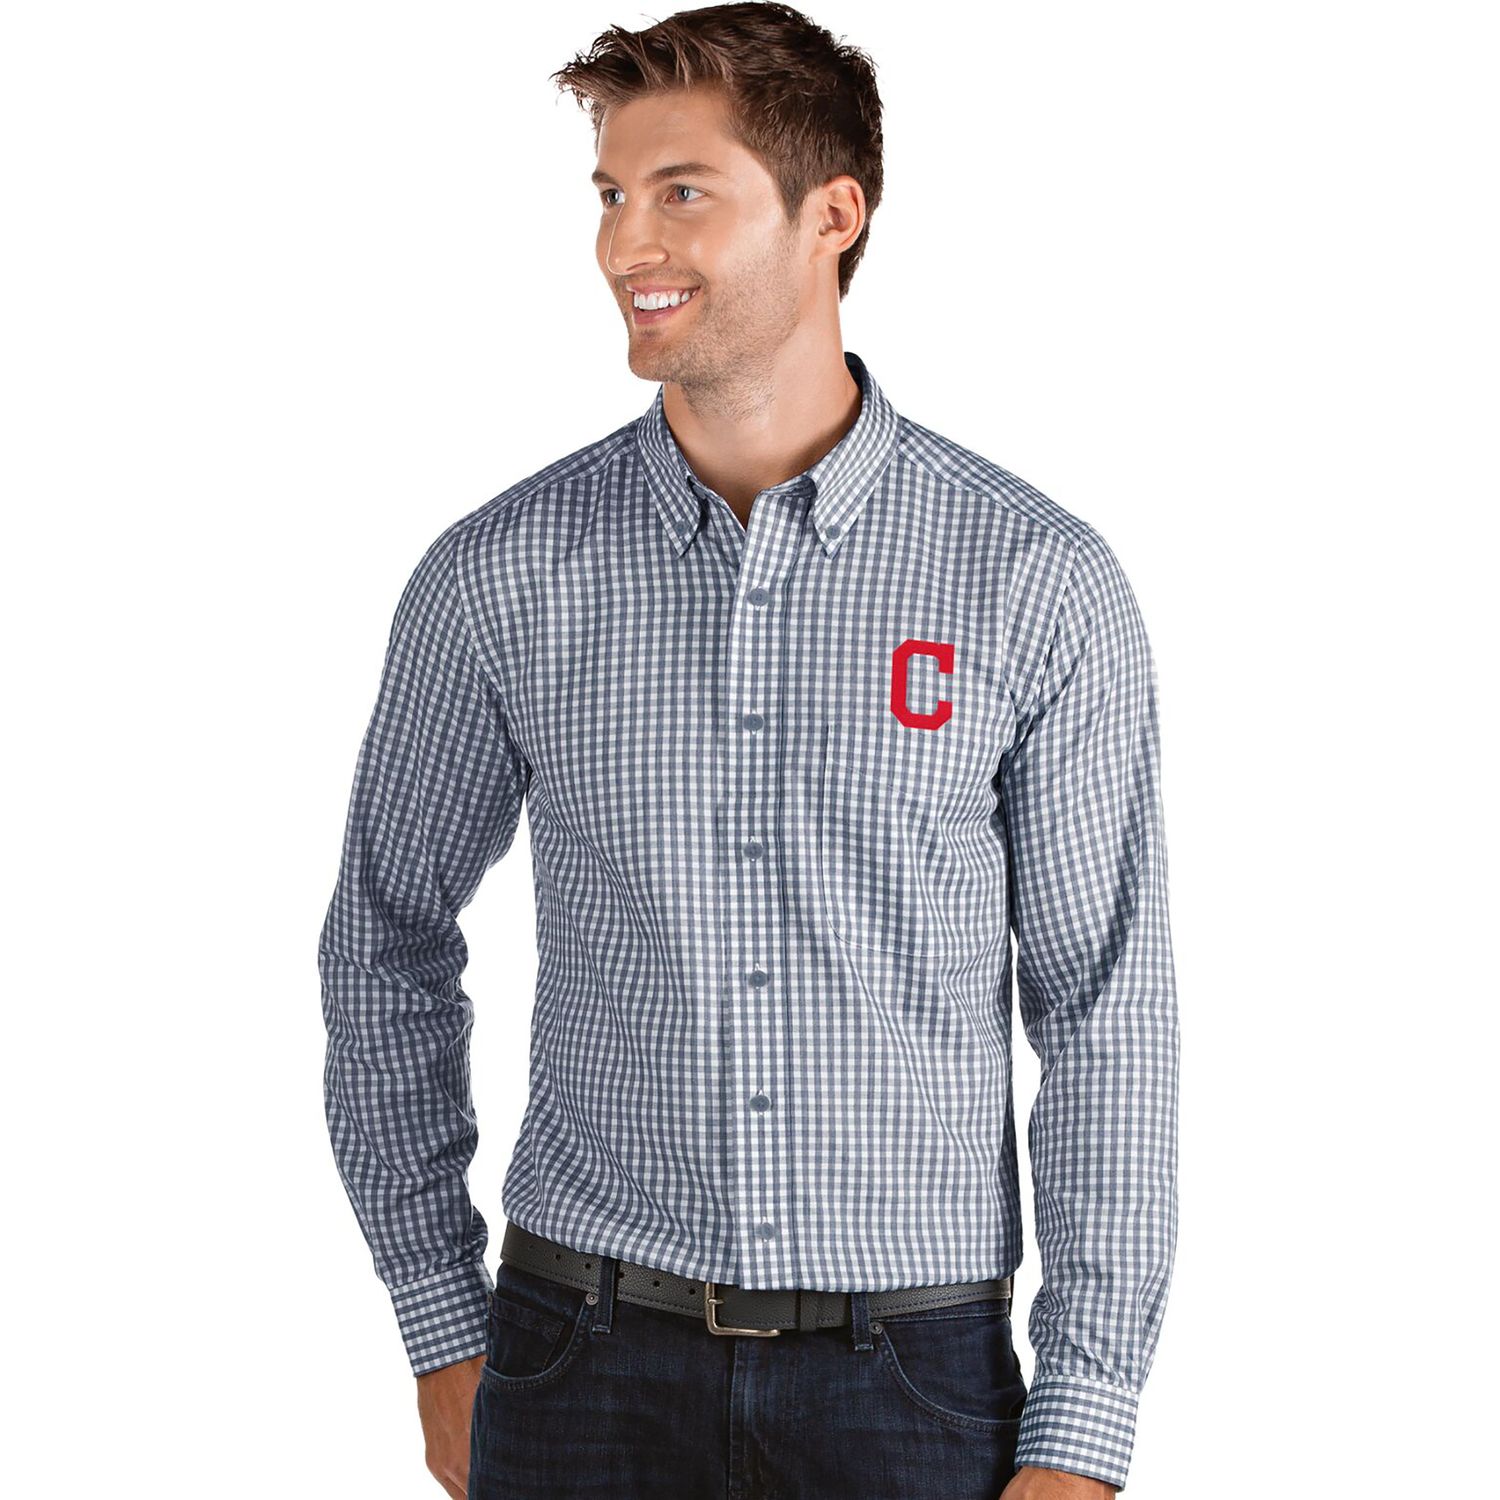 camouflage cardinals jersey